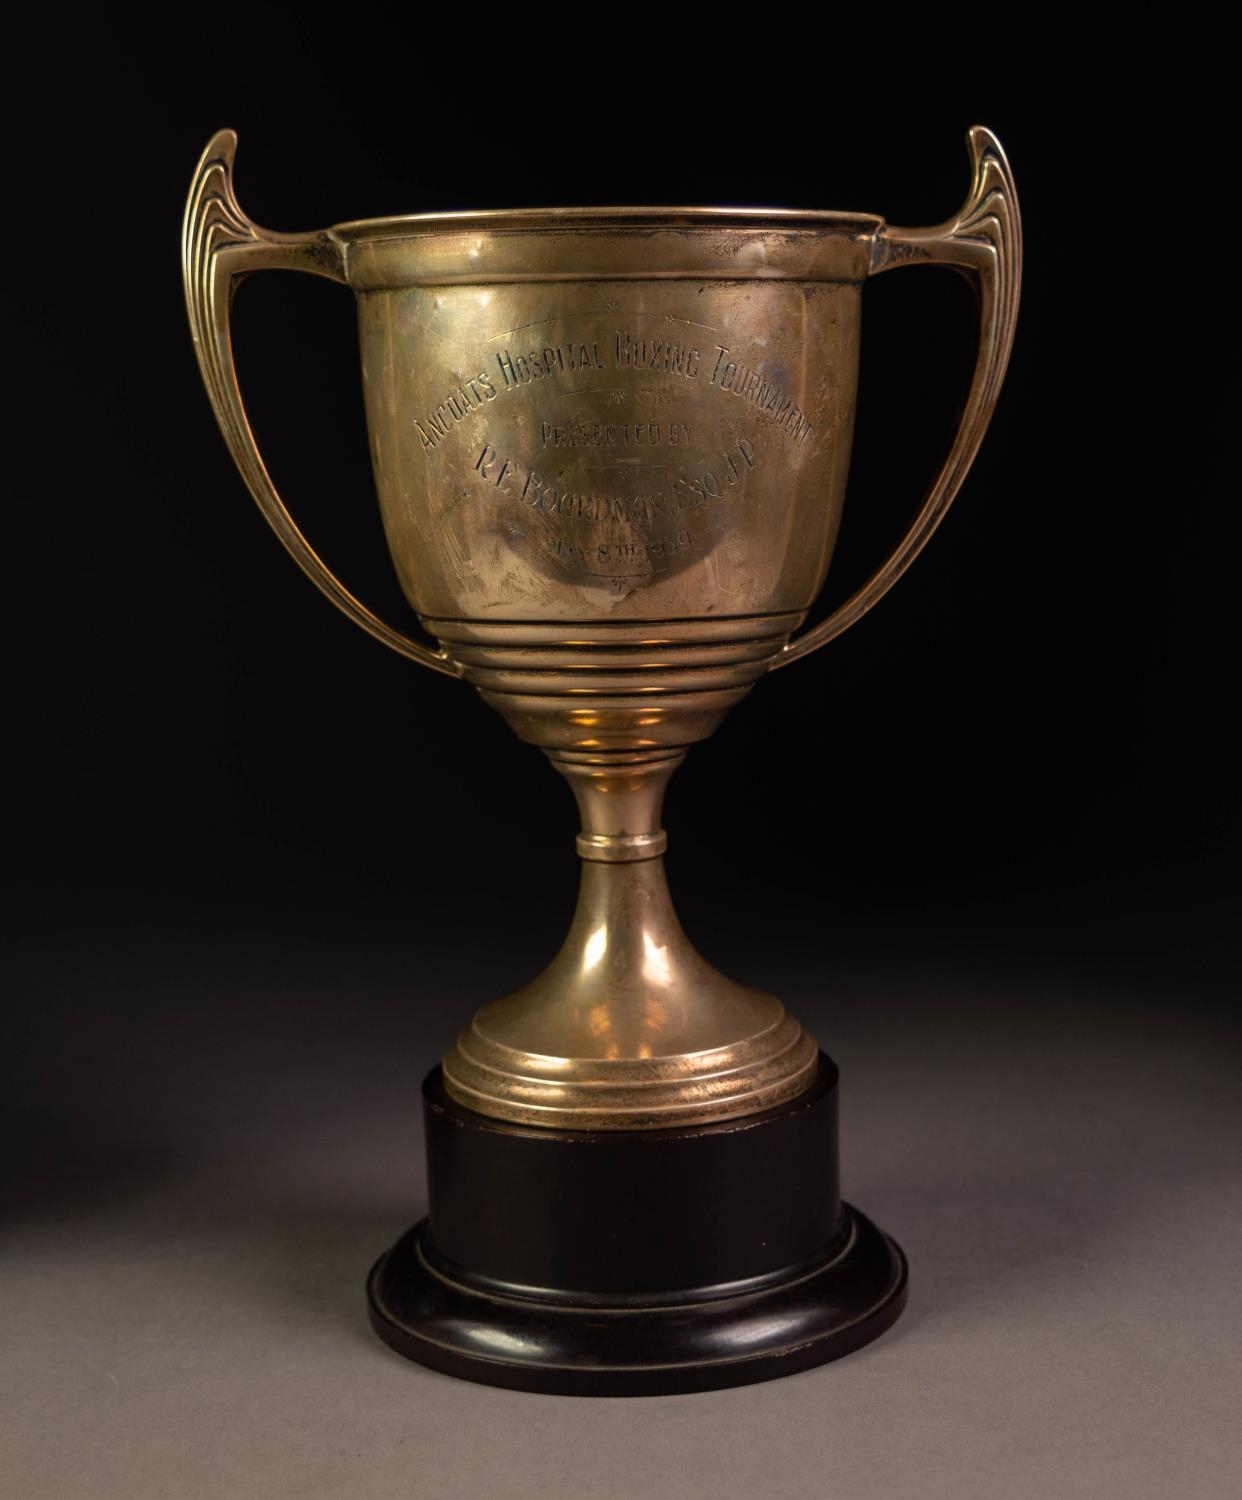 GEORGE VI PRESENTATION TWO HANDLED SILVER TROPHY CUP BY ADIE BROTHERS, with stylish angular